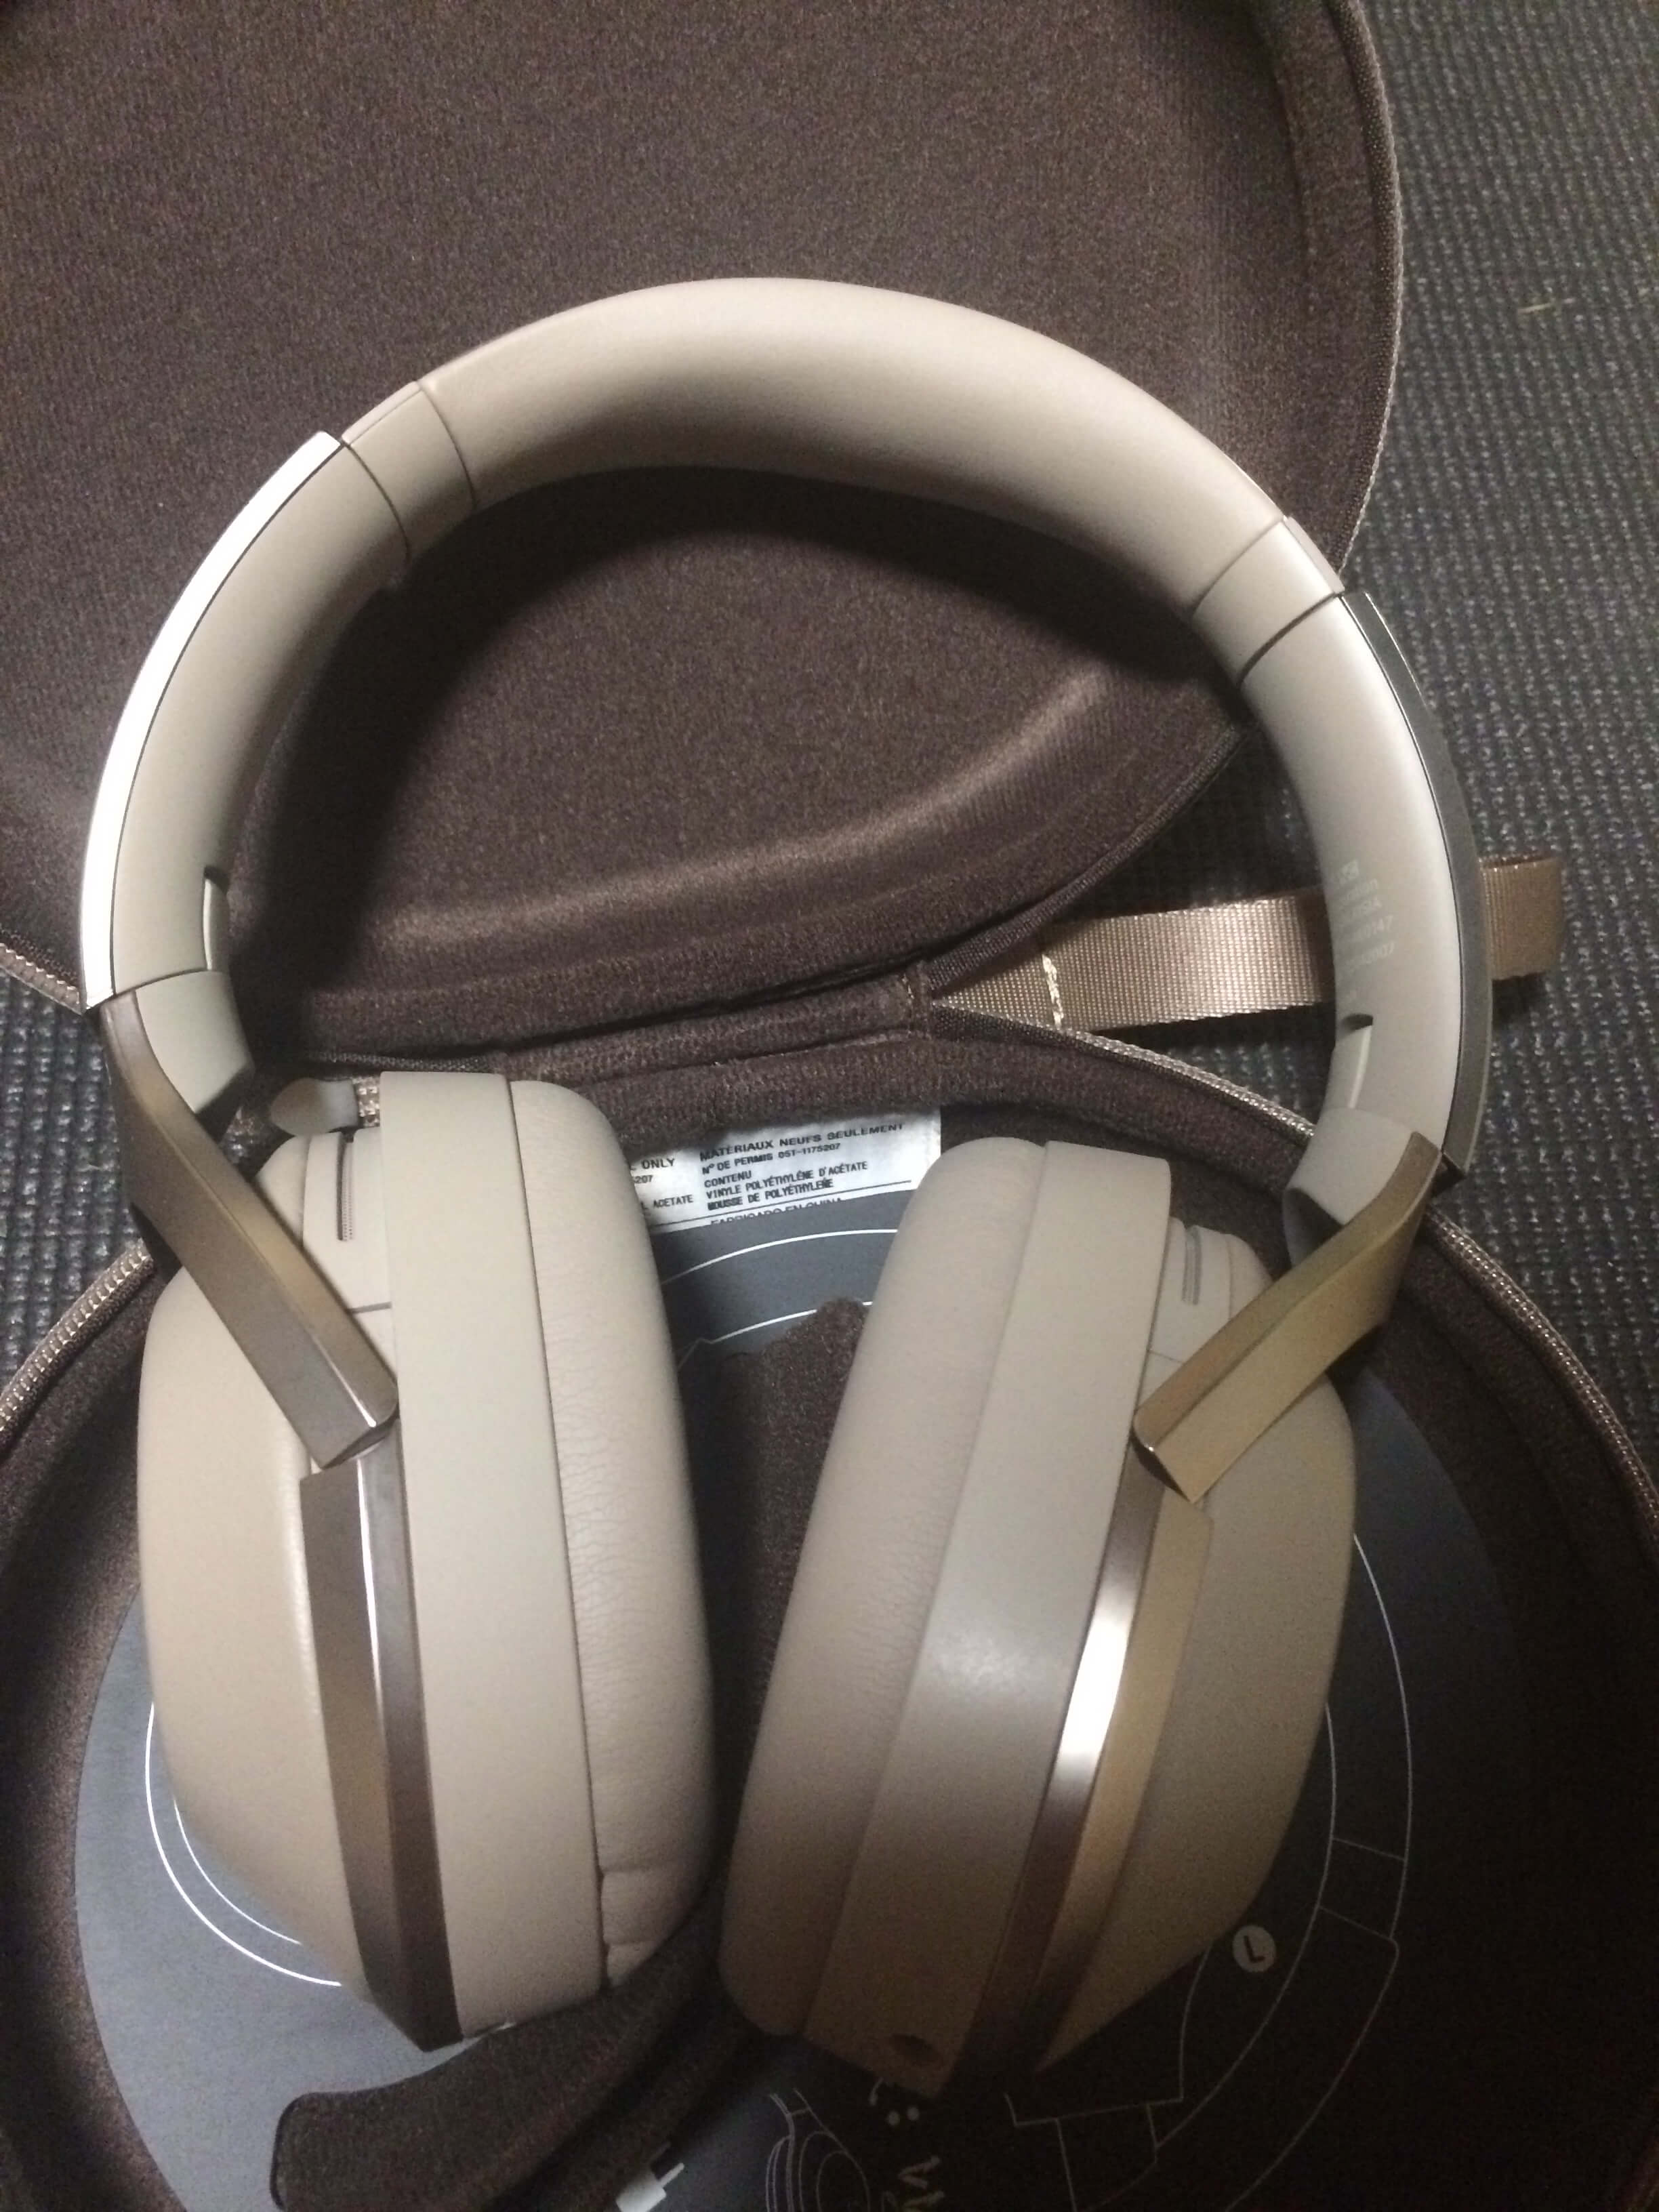 MDR-1000X　評価